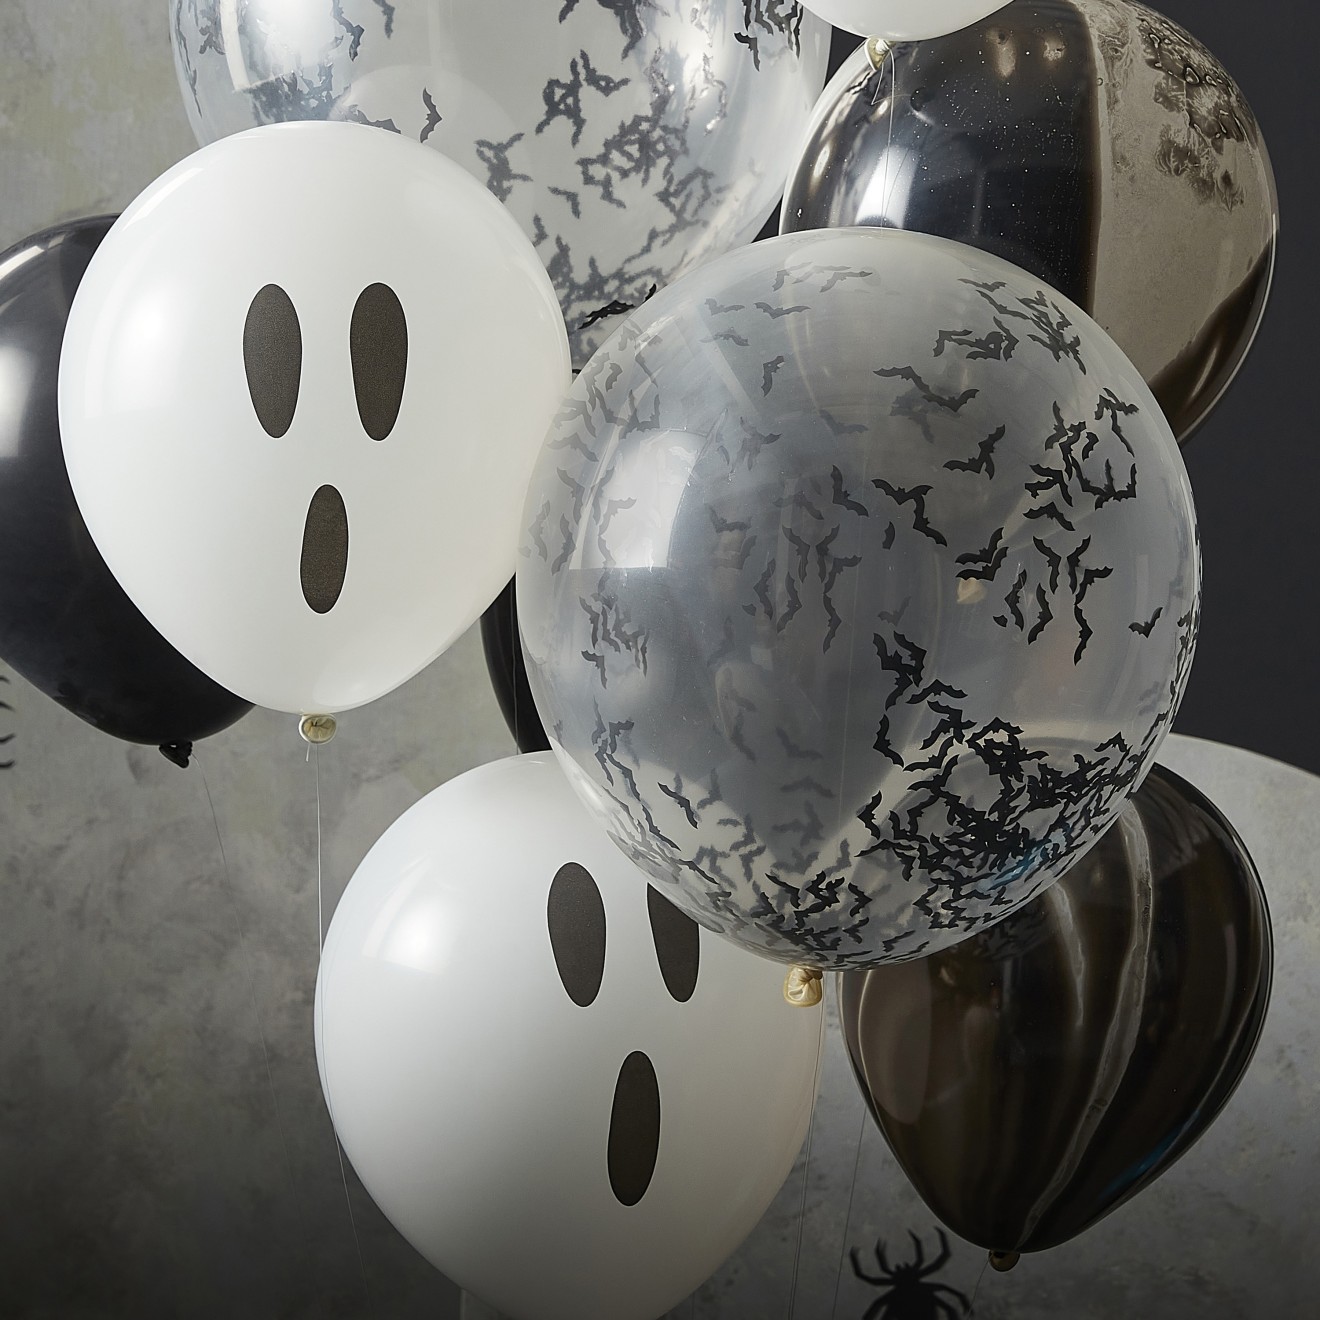 9 Balloon Bundle - Ghost, bats and marble